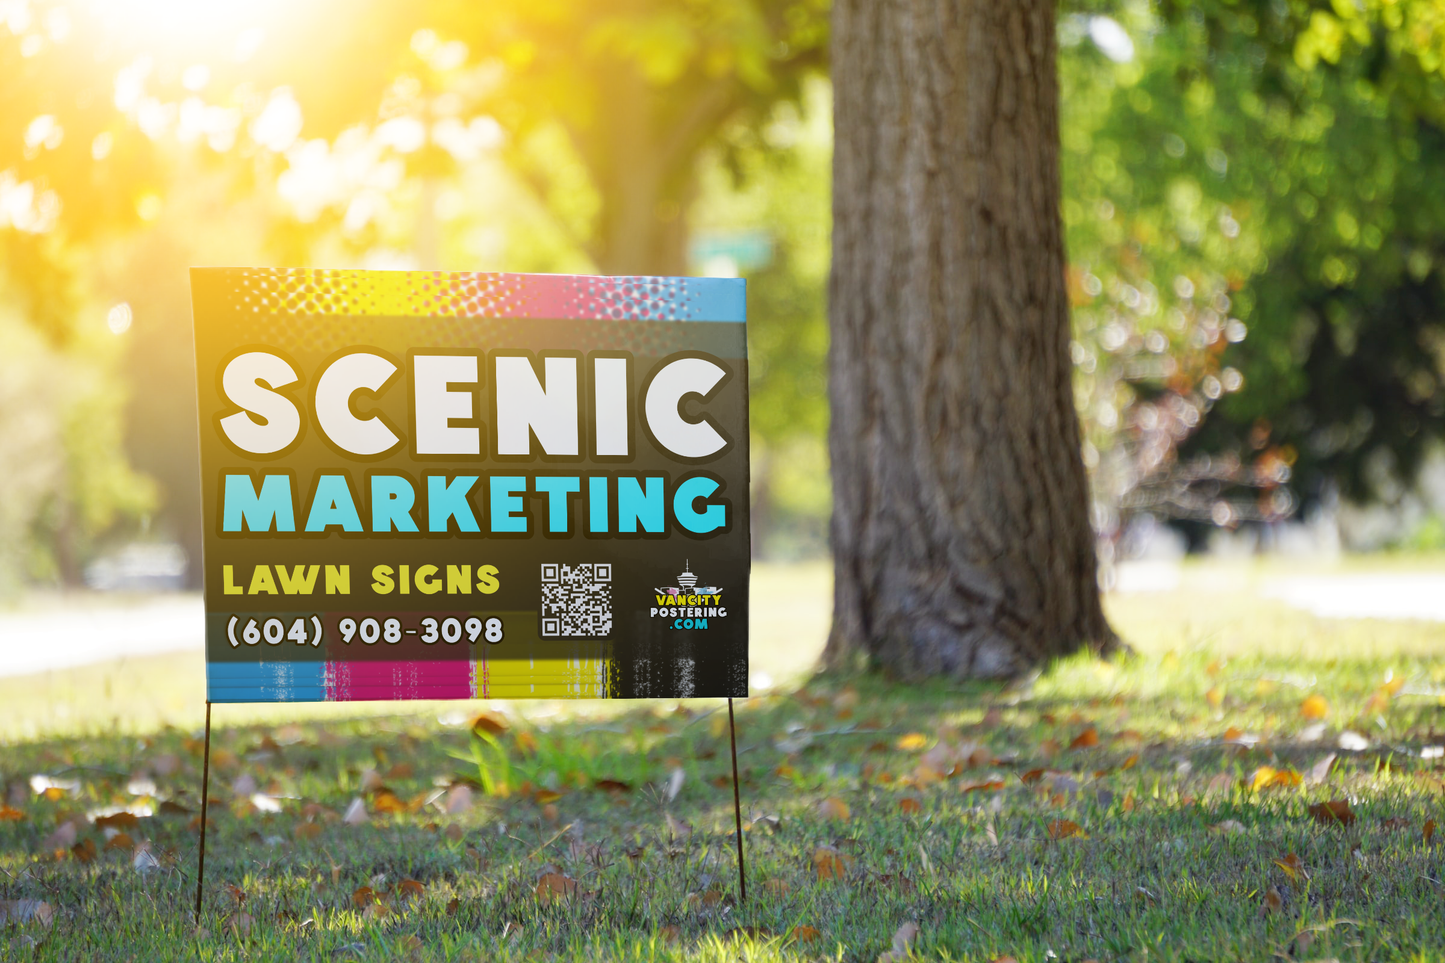 Lawn Signs: Single Sided 16" x 24"